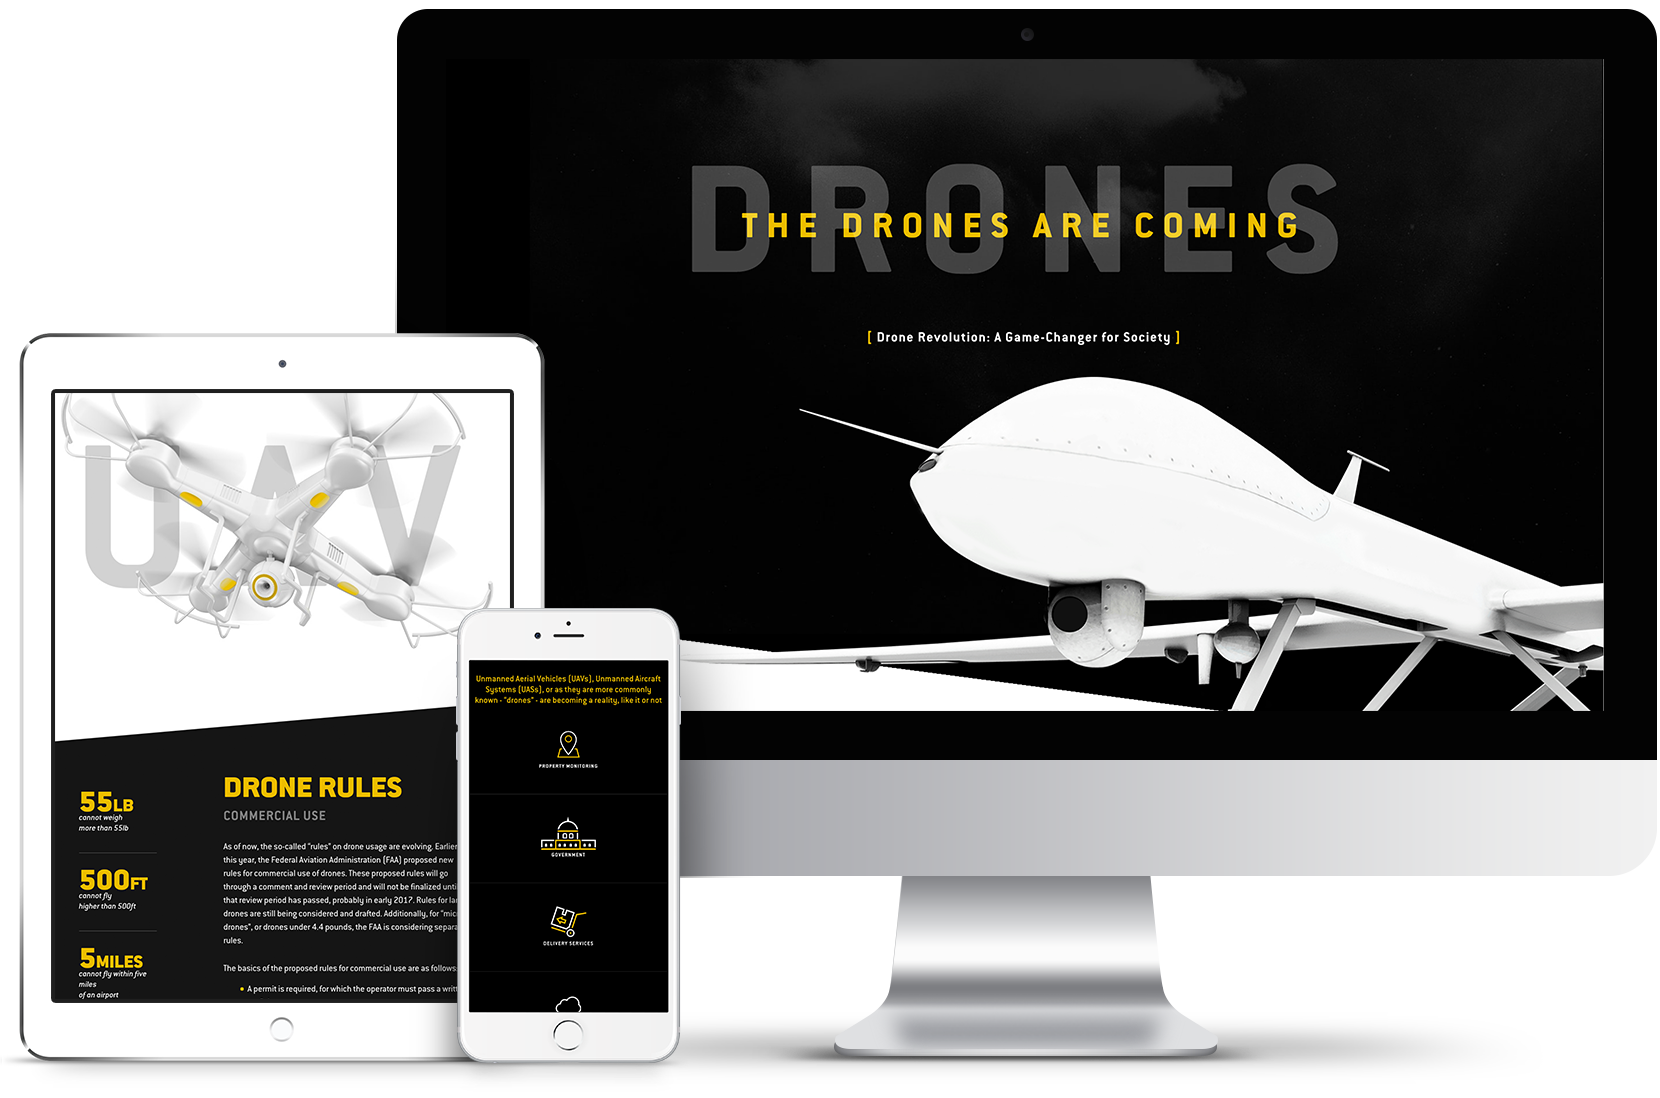 Drone Revolution: A Game-Changer for Society